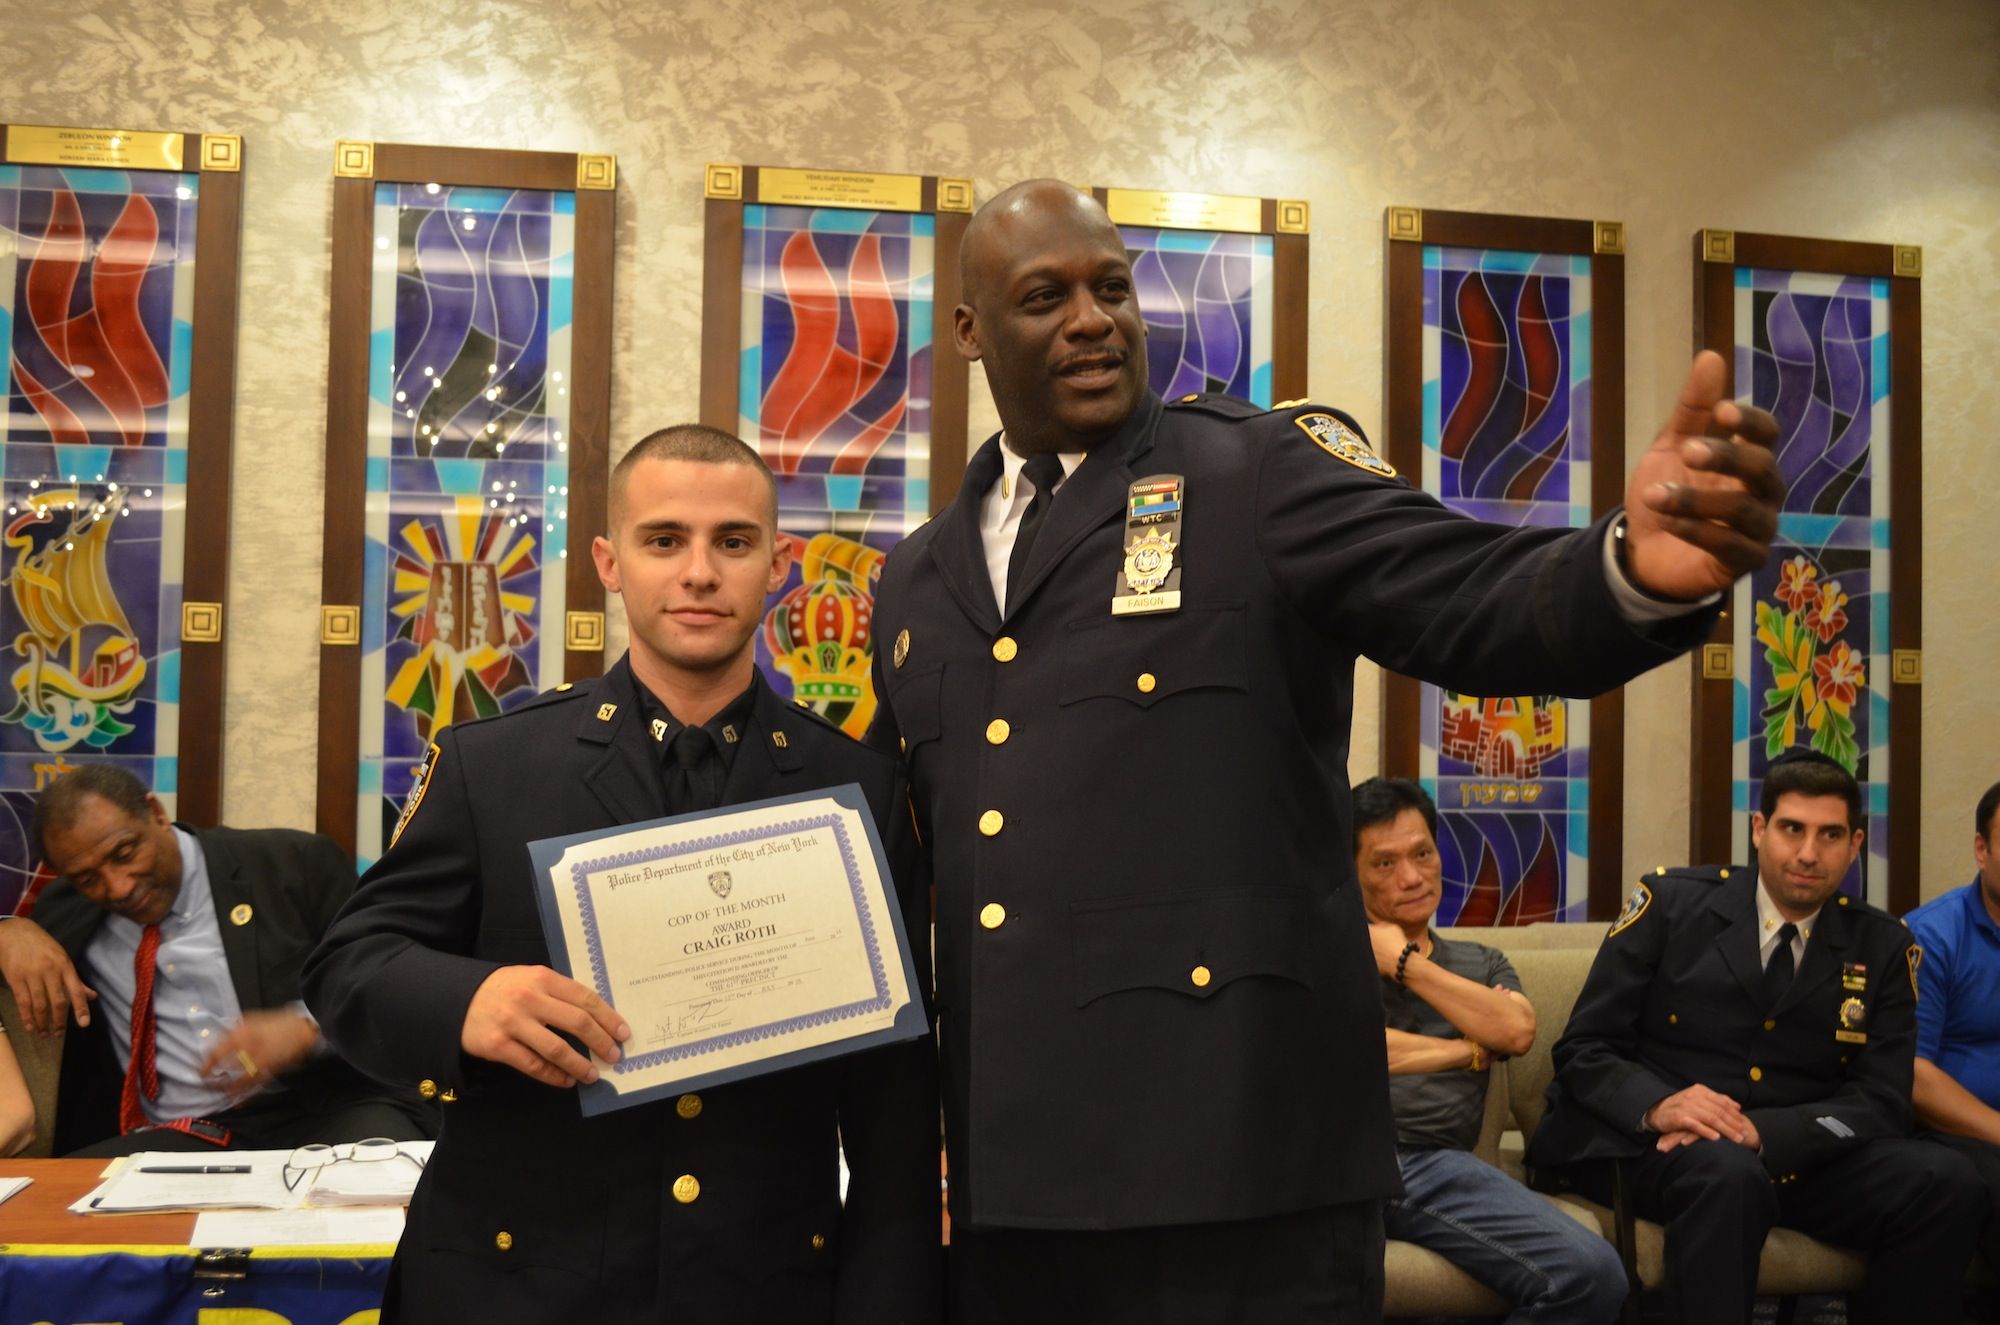 Sheepshead Bay Station House Has Sixth Greatest Crime Decrease In The City